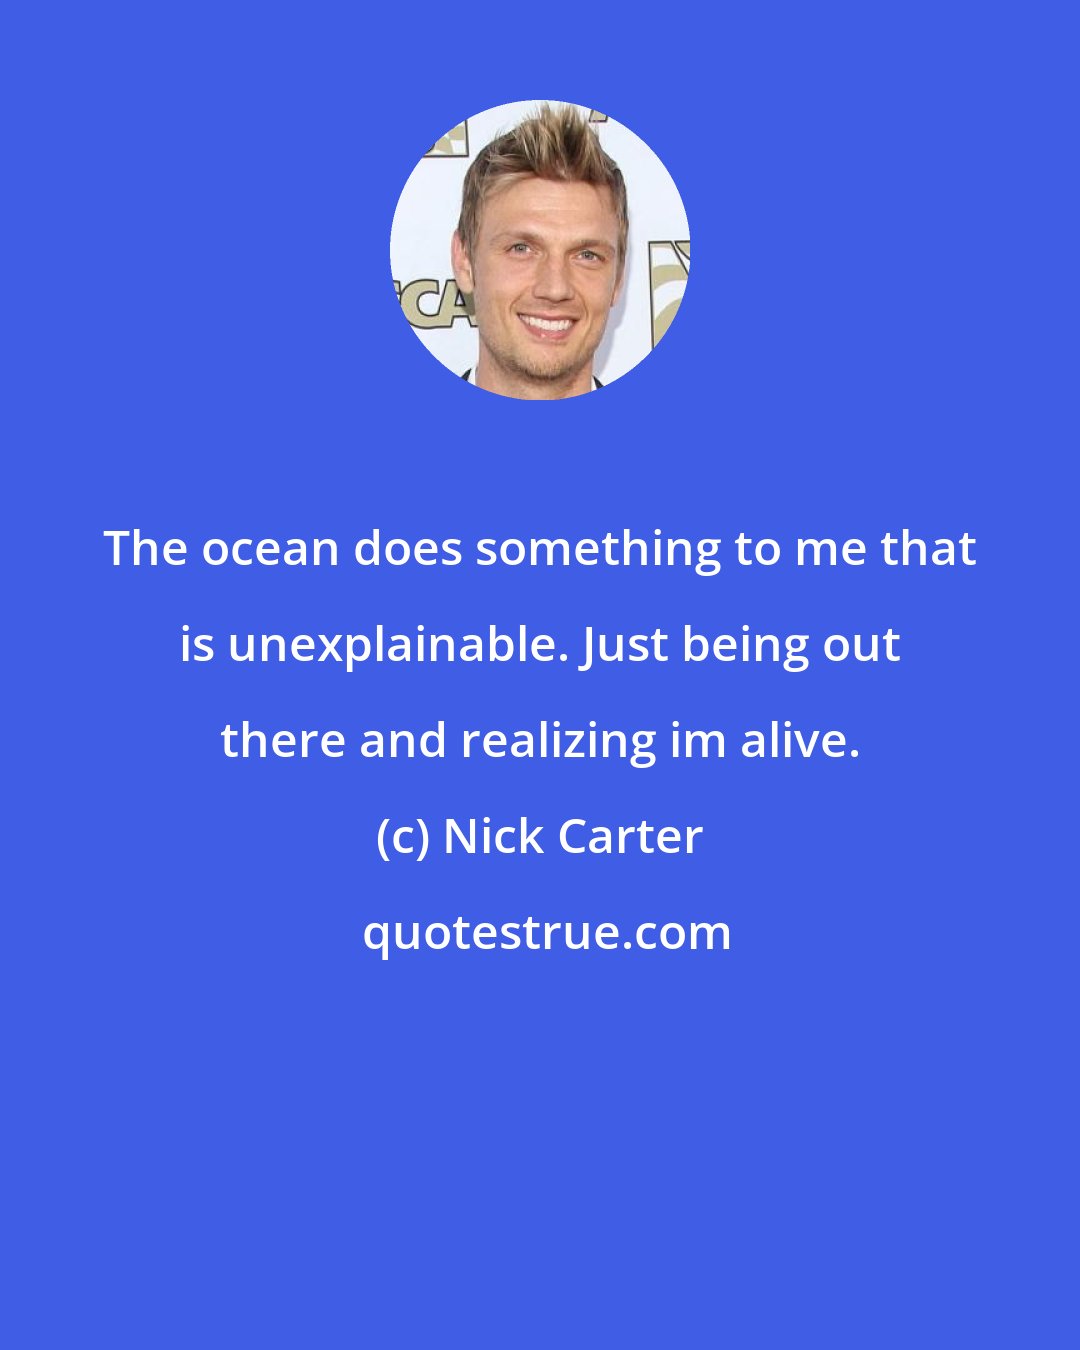 Nick Carter: The ocean does something to me that is unexplainable. Just being out there and realizing im alive.